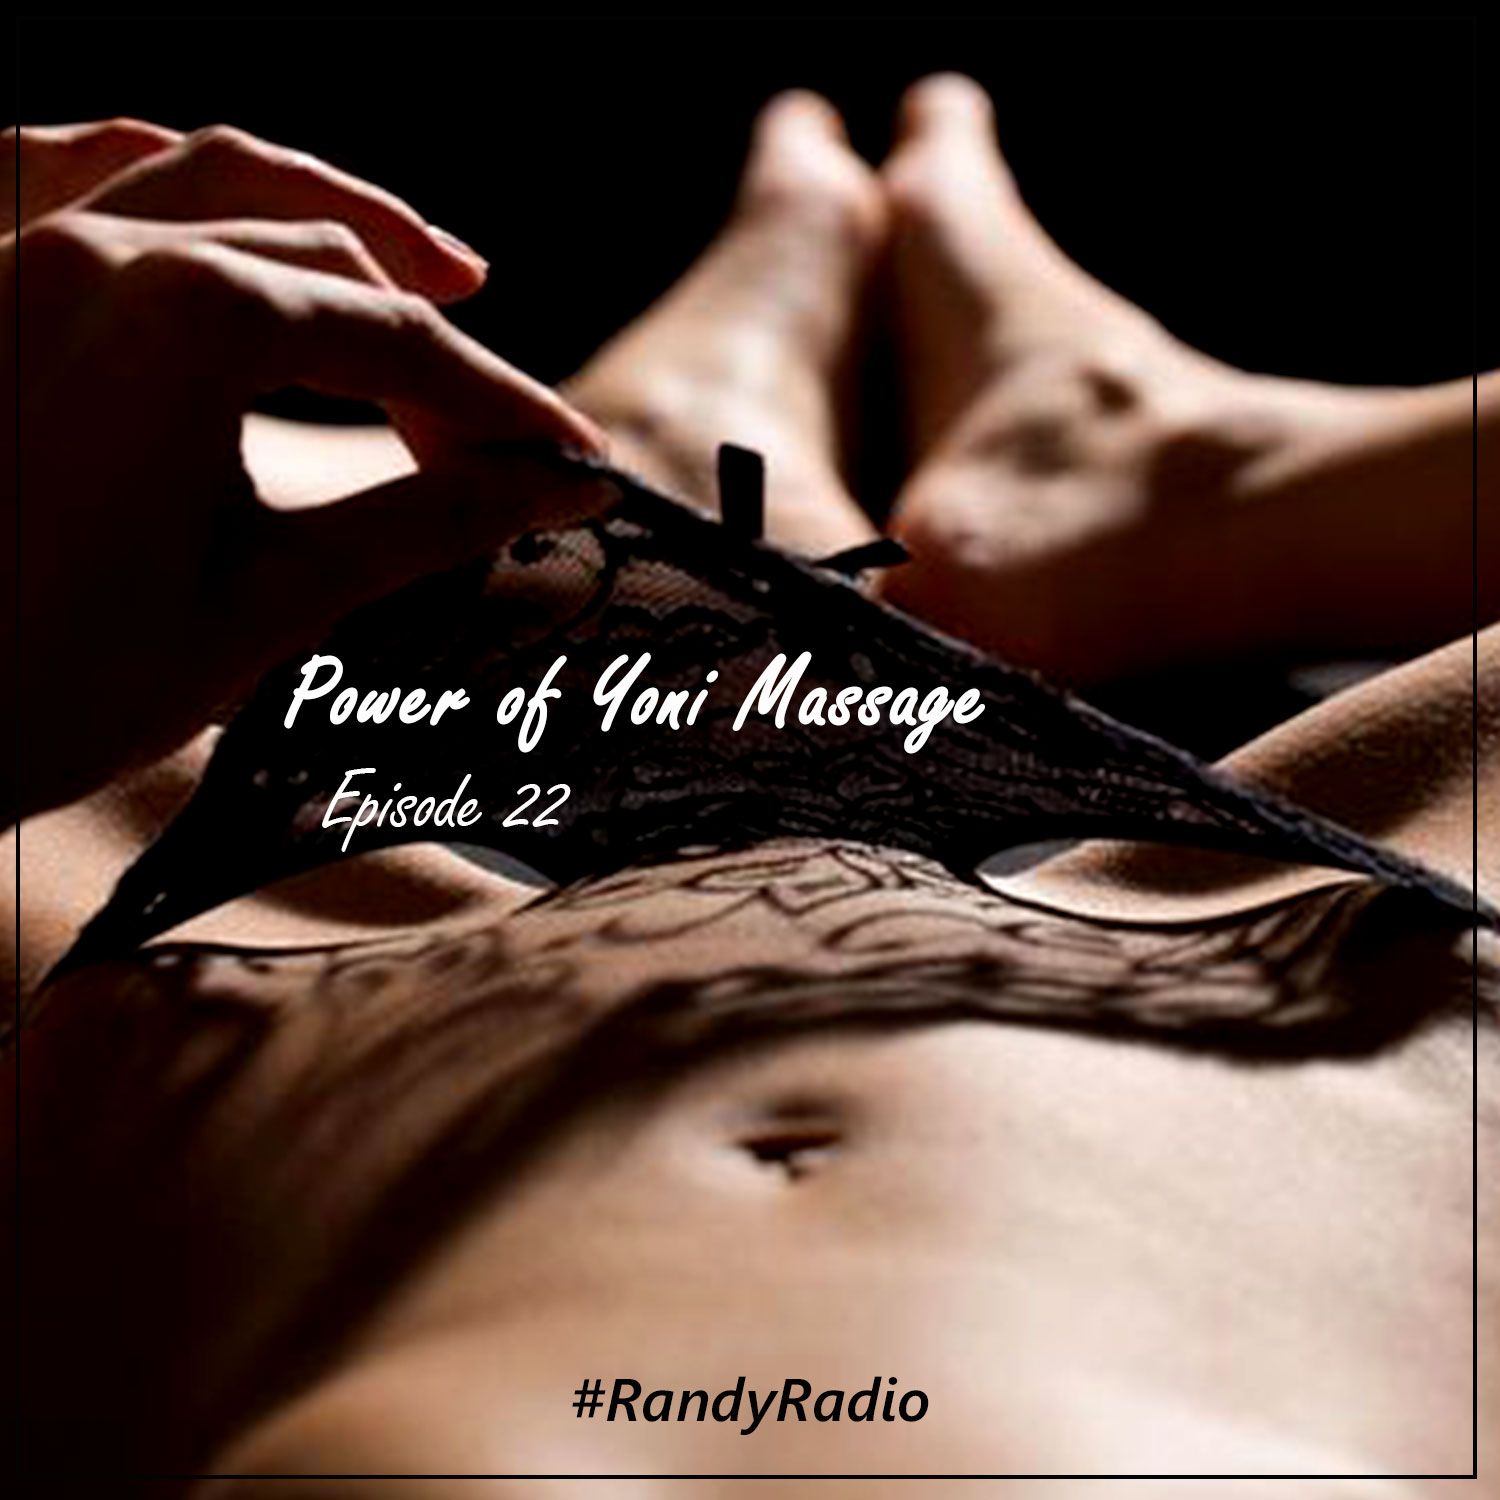 Randy Radio - [Episode 22] - Power of Yoni Massage with Slyrie